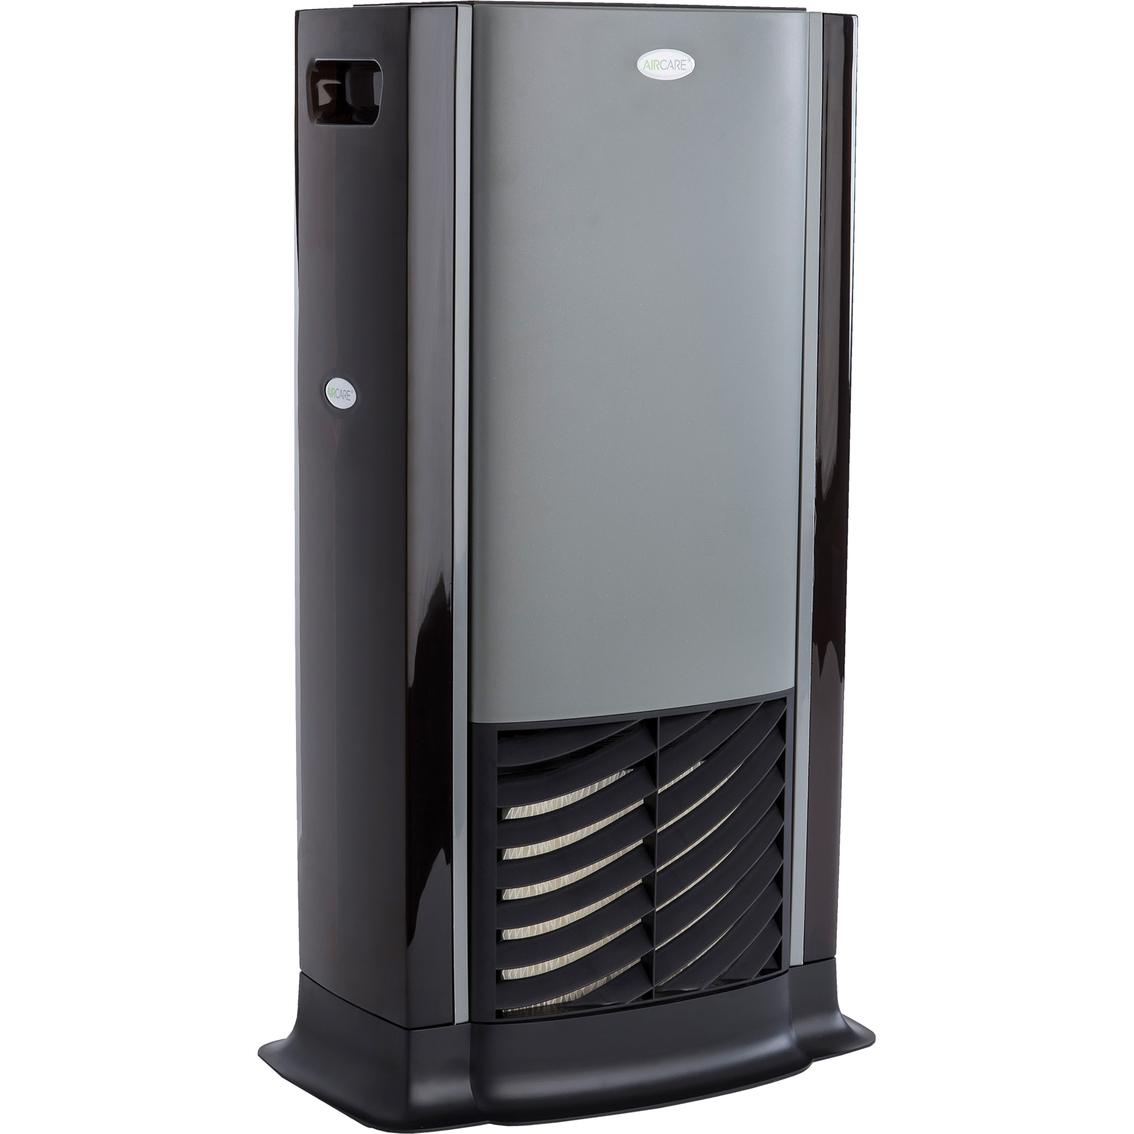 Aircare Evaporative Humidifier Tower D46720 - Image 2 of 7